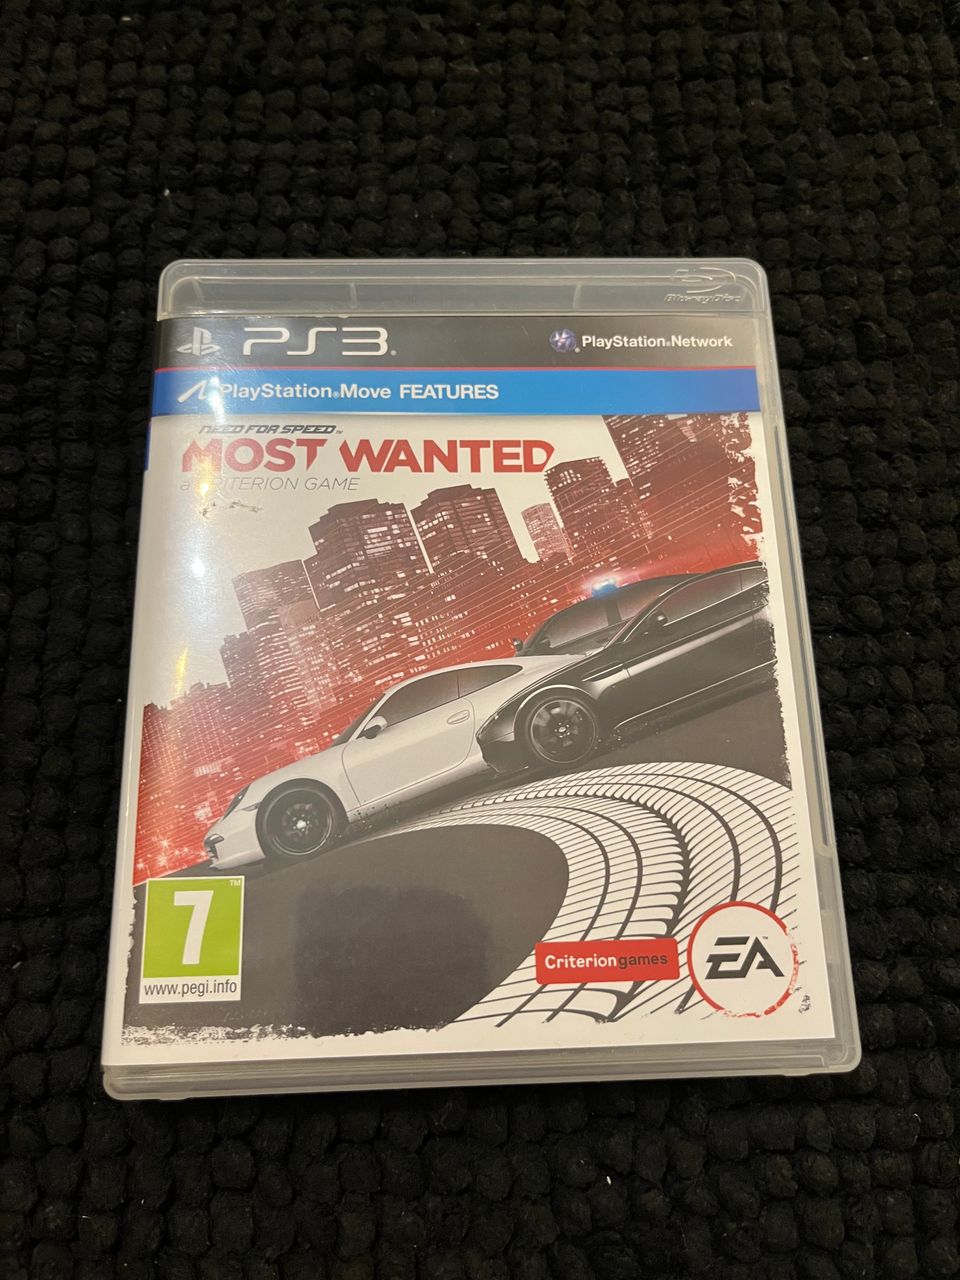 Need for speed Most wanted